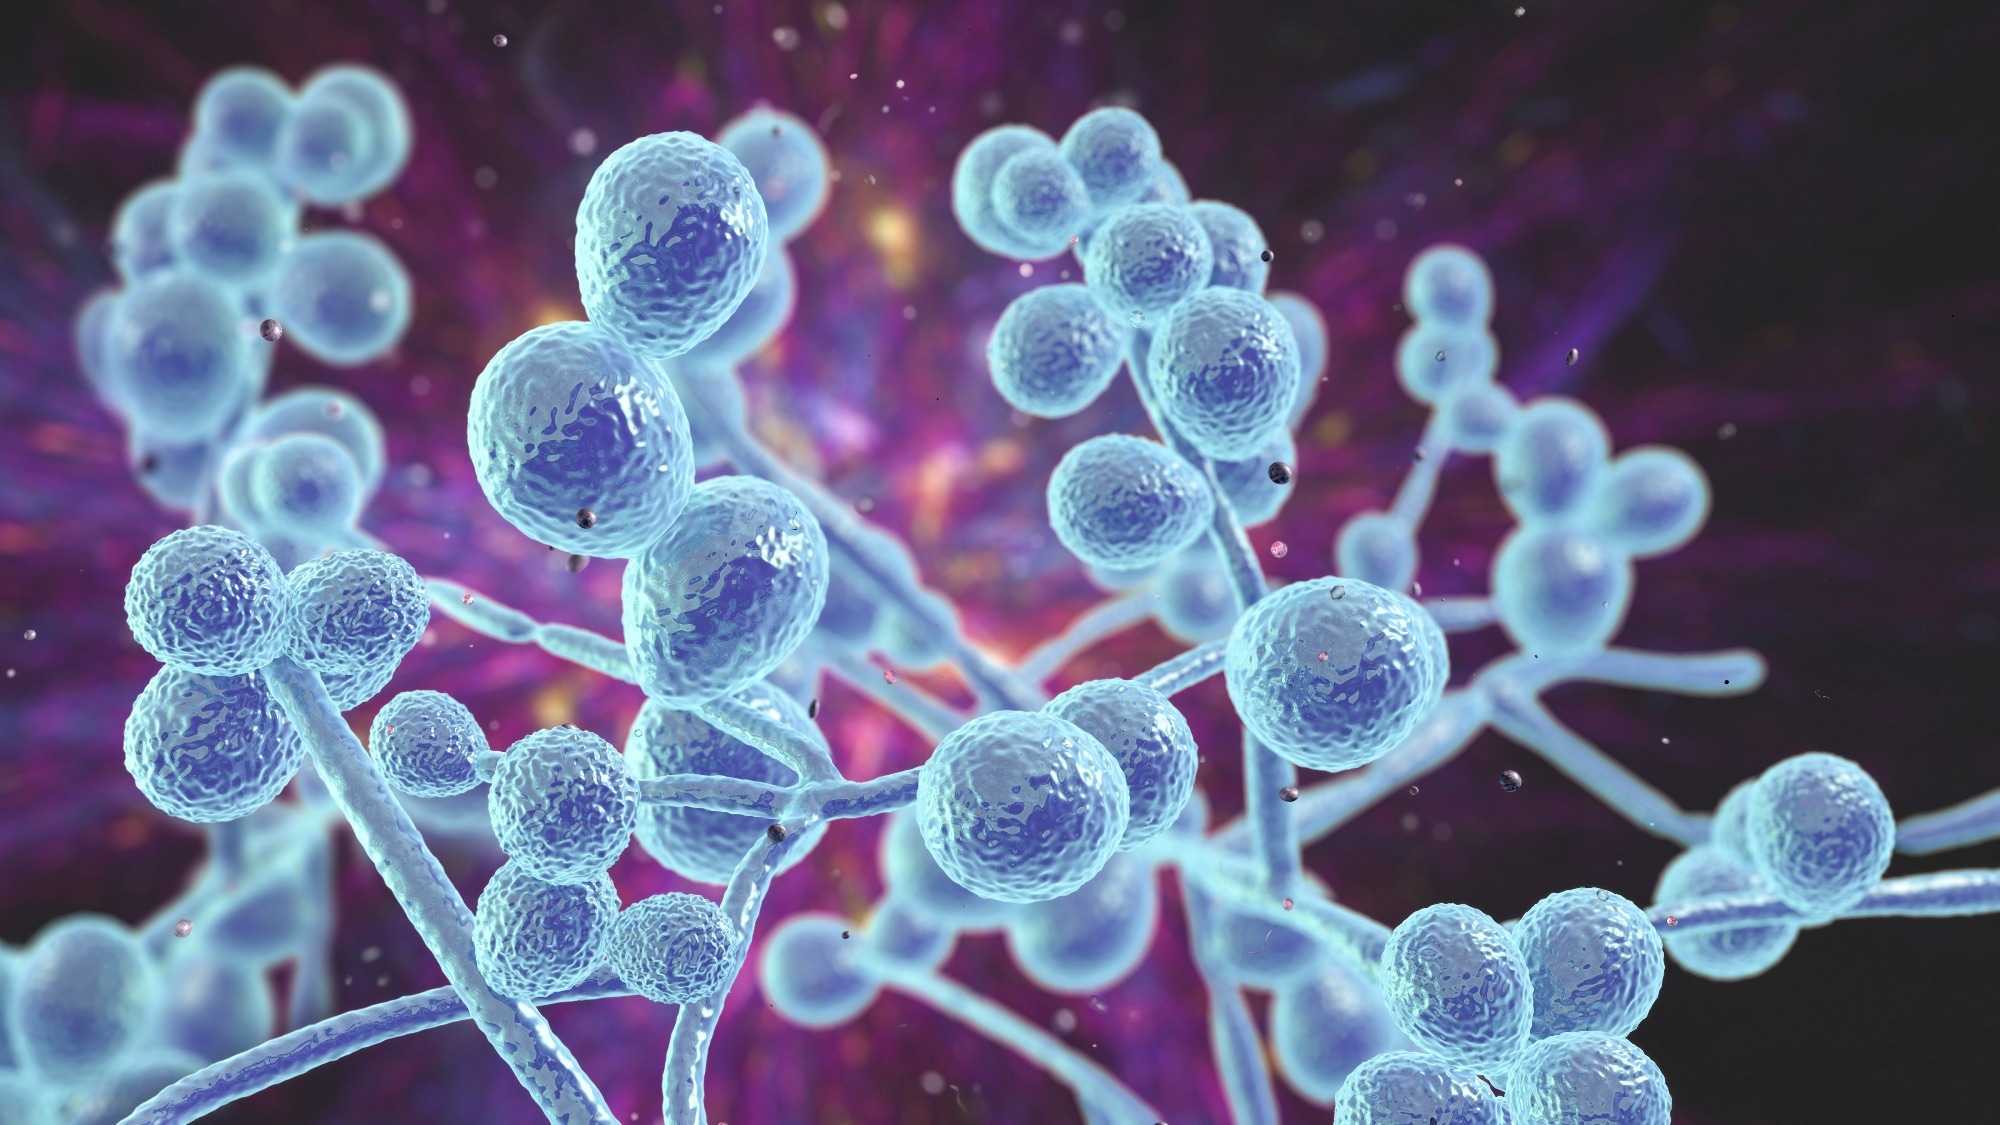 Study: Nationwide Outbreak of Candida auris Infections Driven by COVID-19 Hospitalizations, Israel, 2021–2022. Image Credit: KaterynaKon/Shutterstock.com